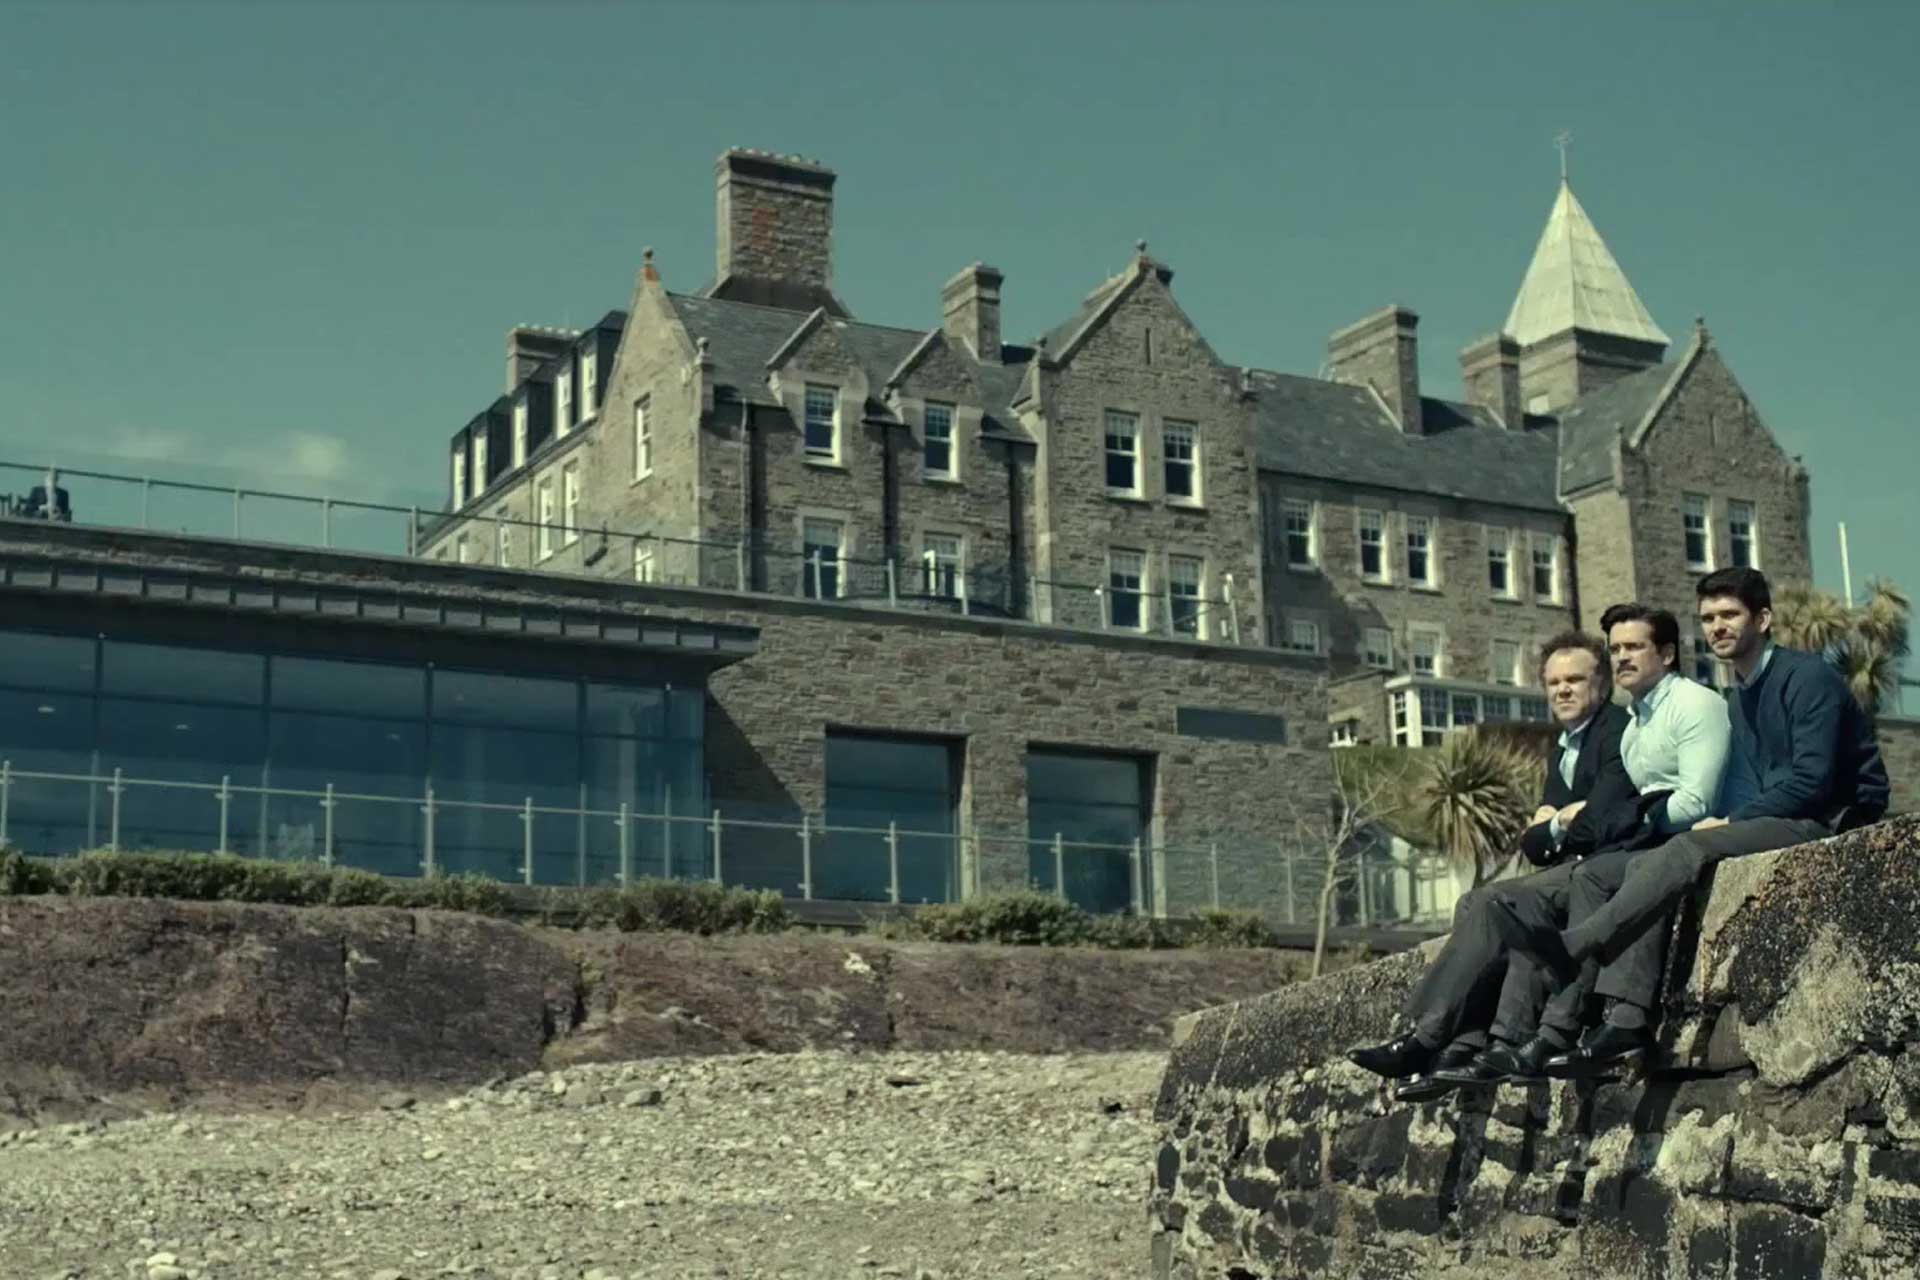 Parknasilla Resort & Spa hosted the filming of The Lobster